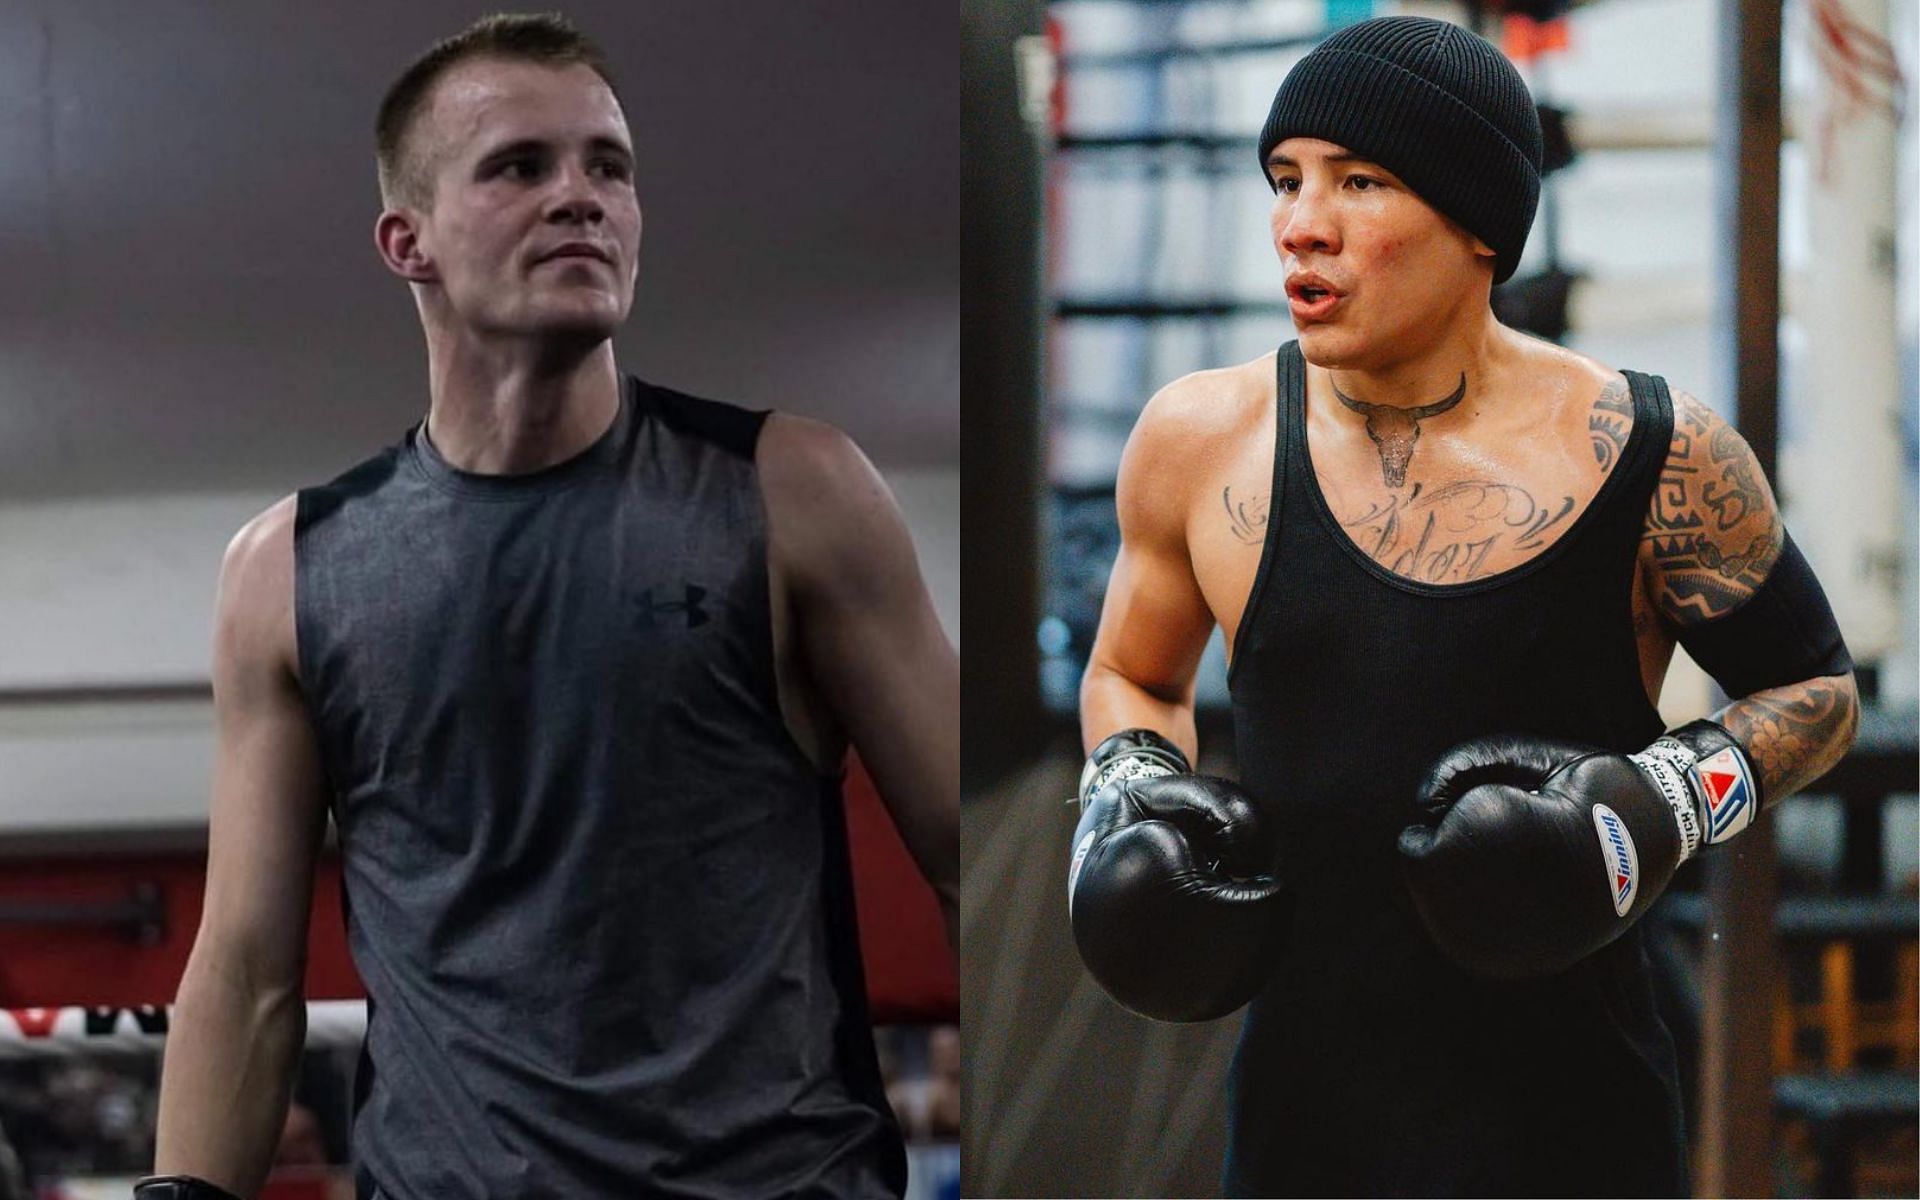 Liam Wilson (left) will clash against Oscar Valdez (right) in an interim title matchup this week [Images courtesy: @liamjwilson22 and @oscarvaldez56 on Instagram]